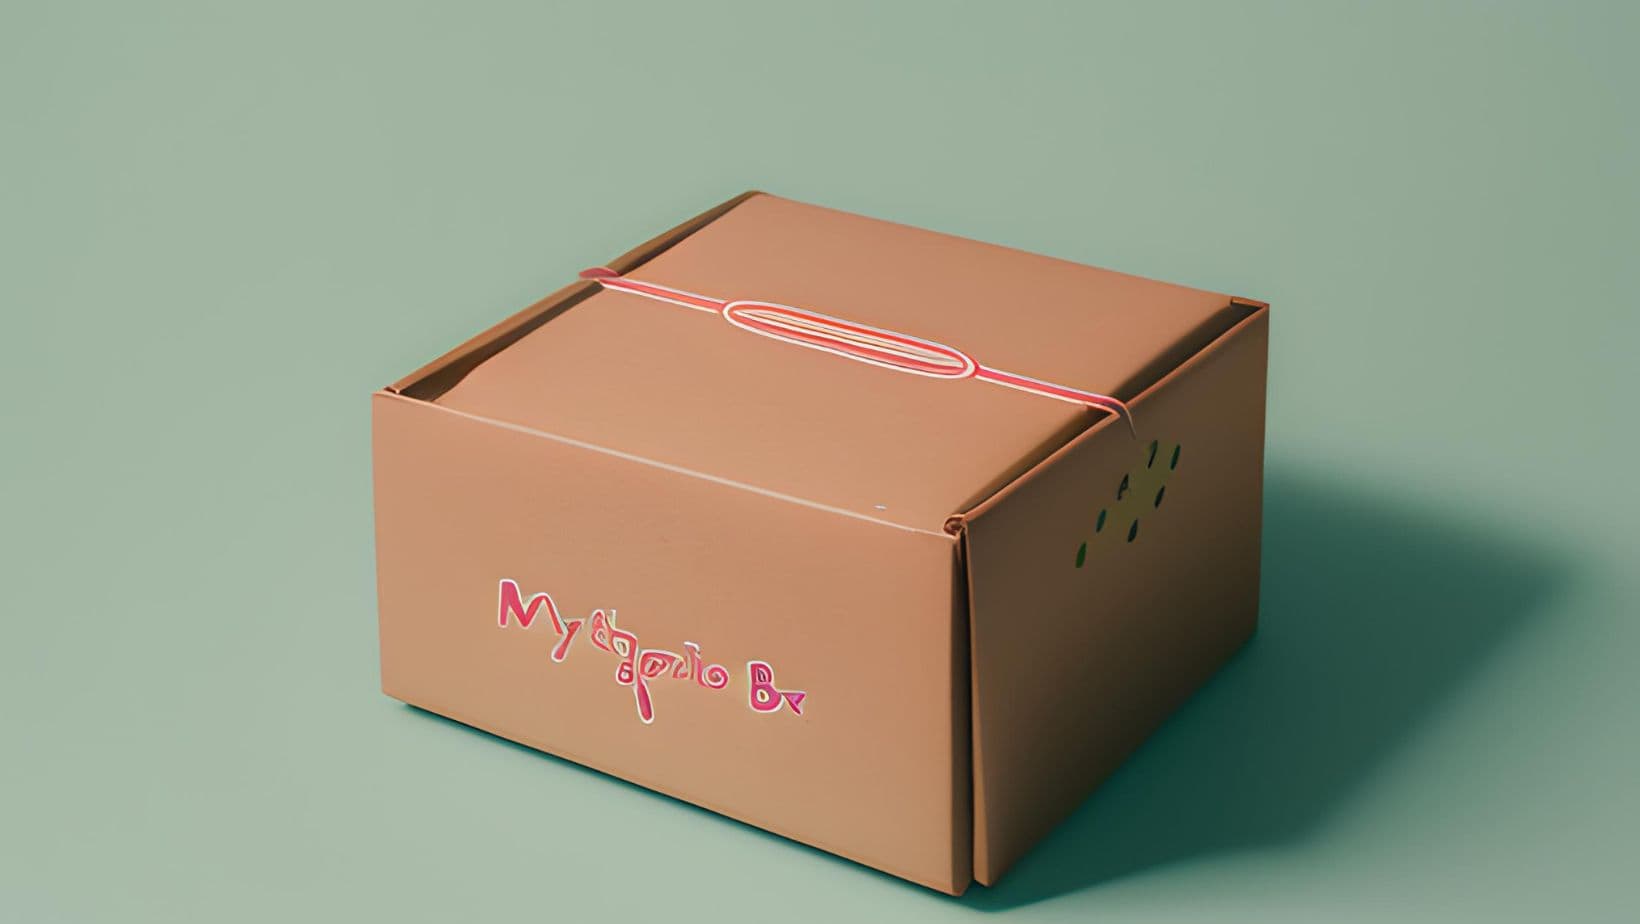 a mystery box made for creative marketing of baked goodies